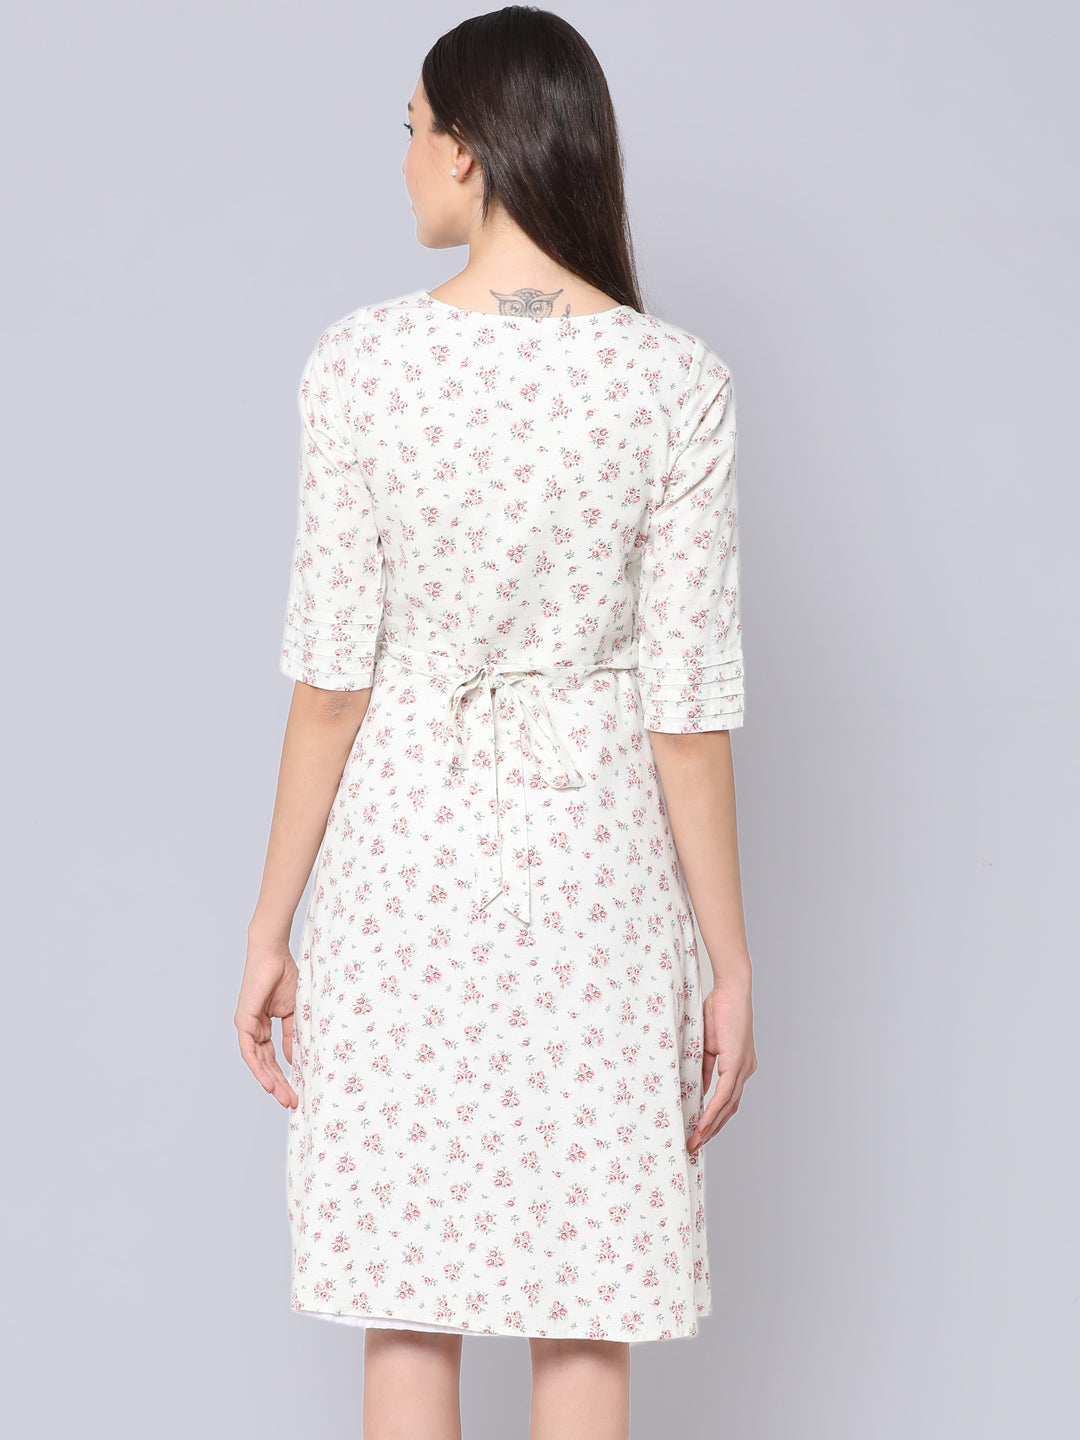 Blooming "Pure Cotton" Pleated Floral Dress